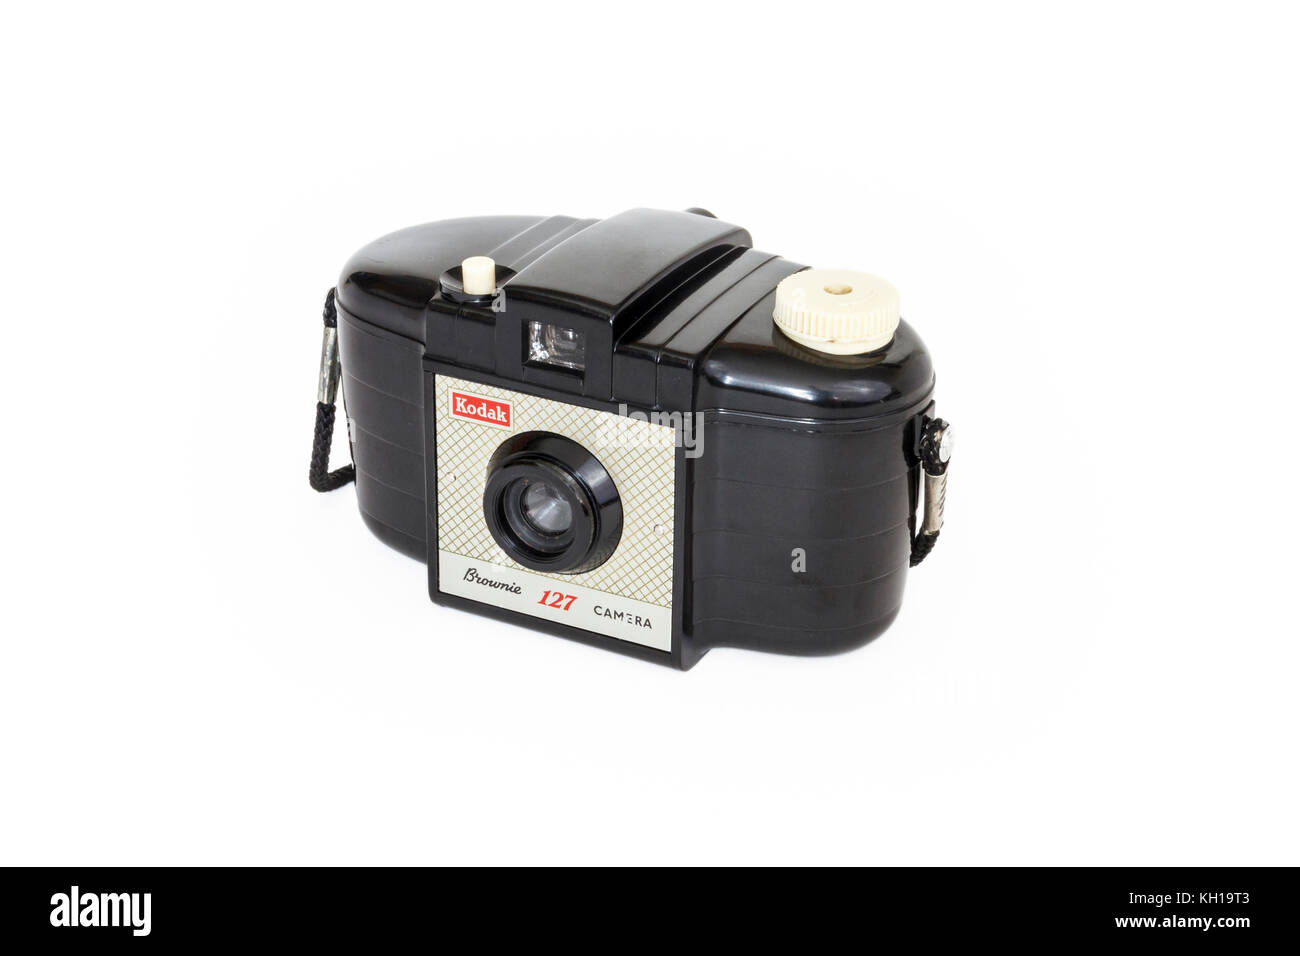 Classic 1950s Kodak Brownie 127 roll film camera, isolated against a white background Stock Photo